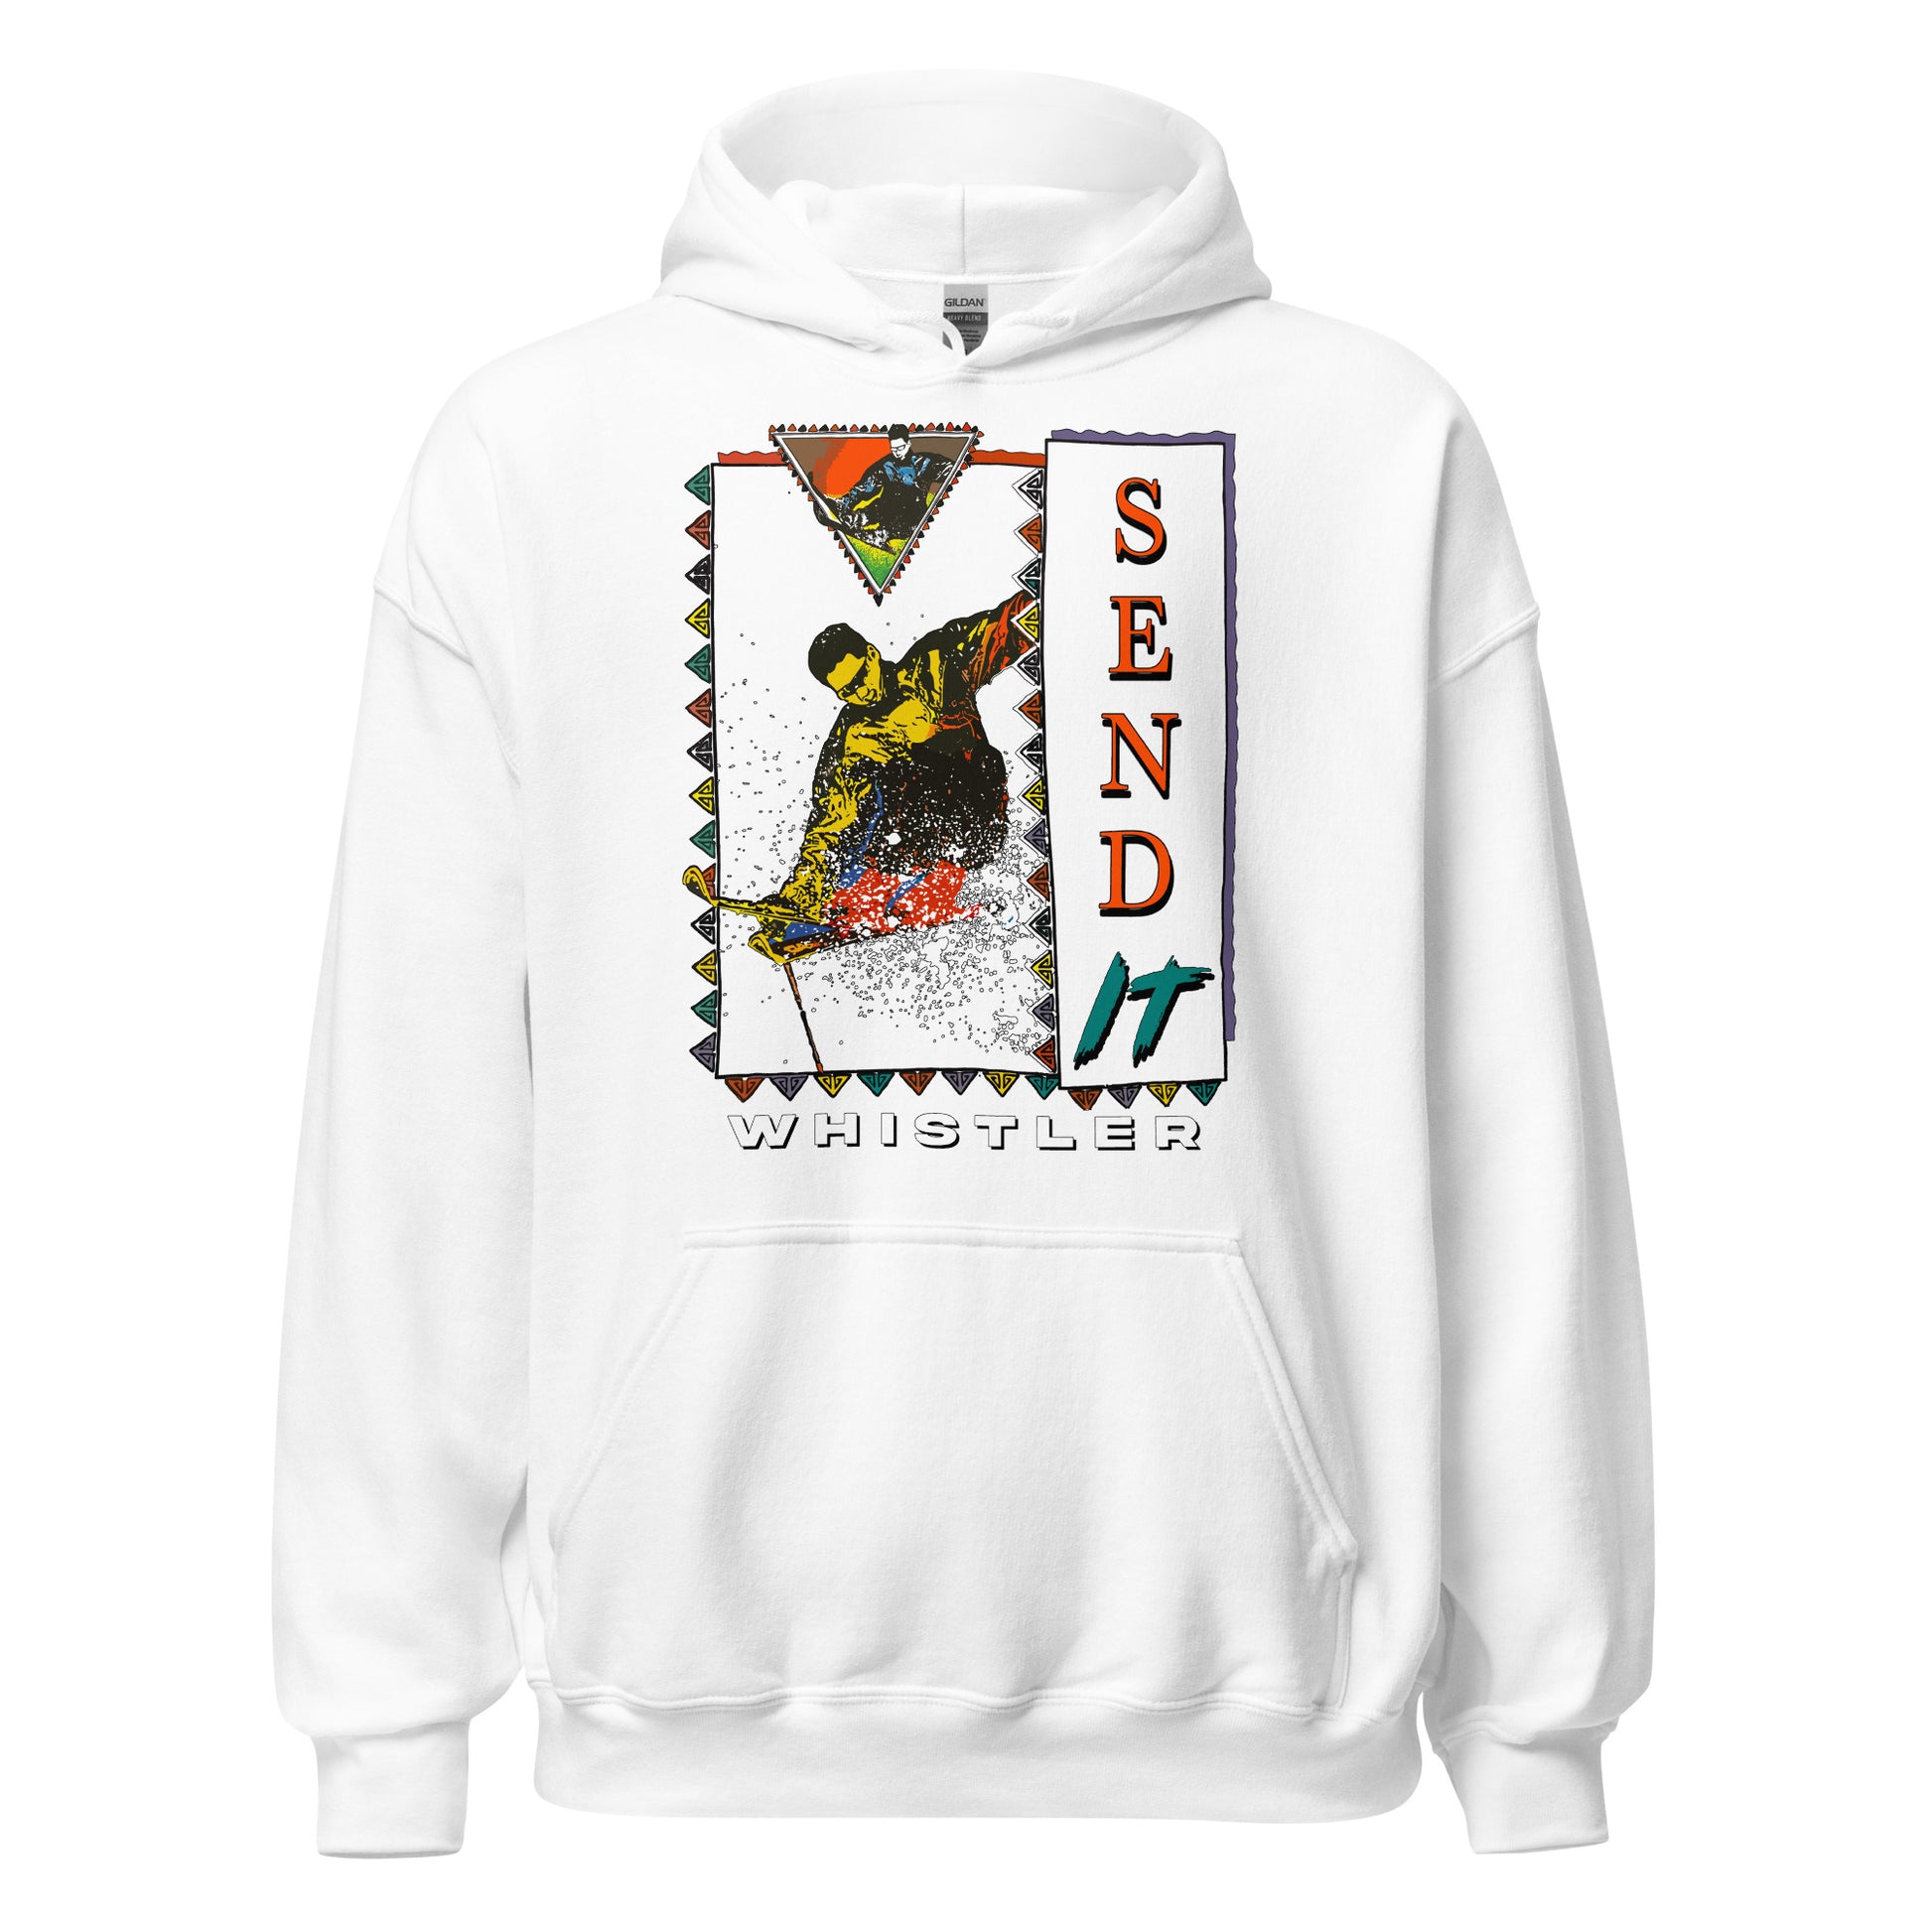 Send it Whistler printed on a hoodie by Whistler Shirts